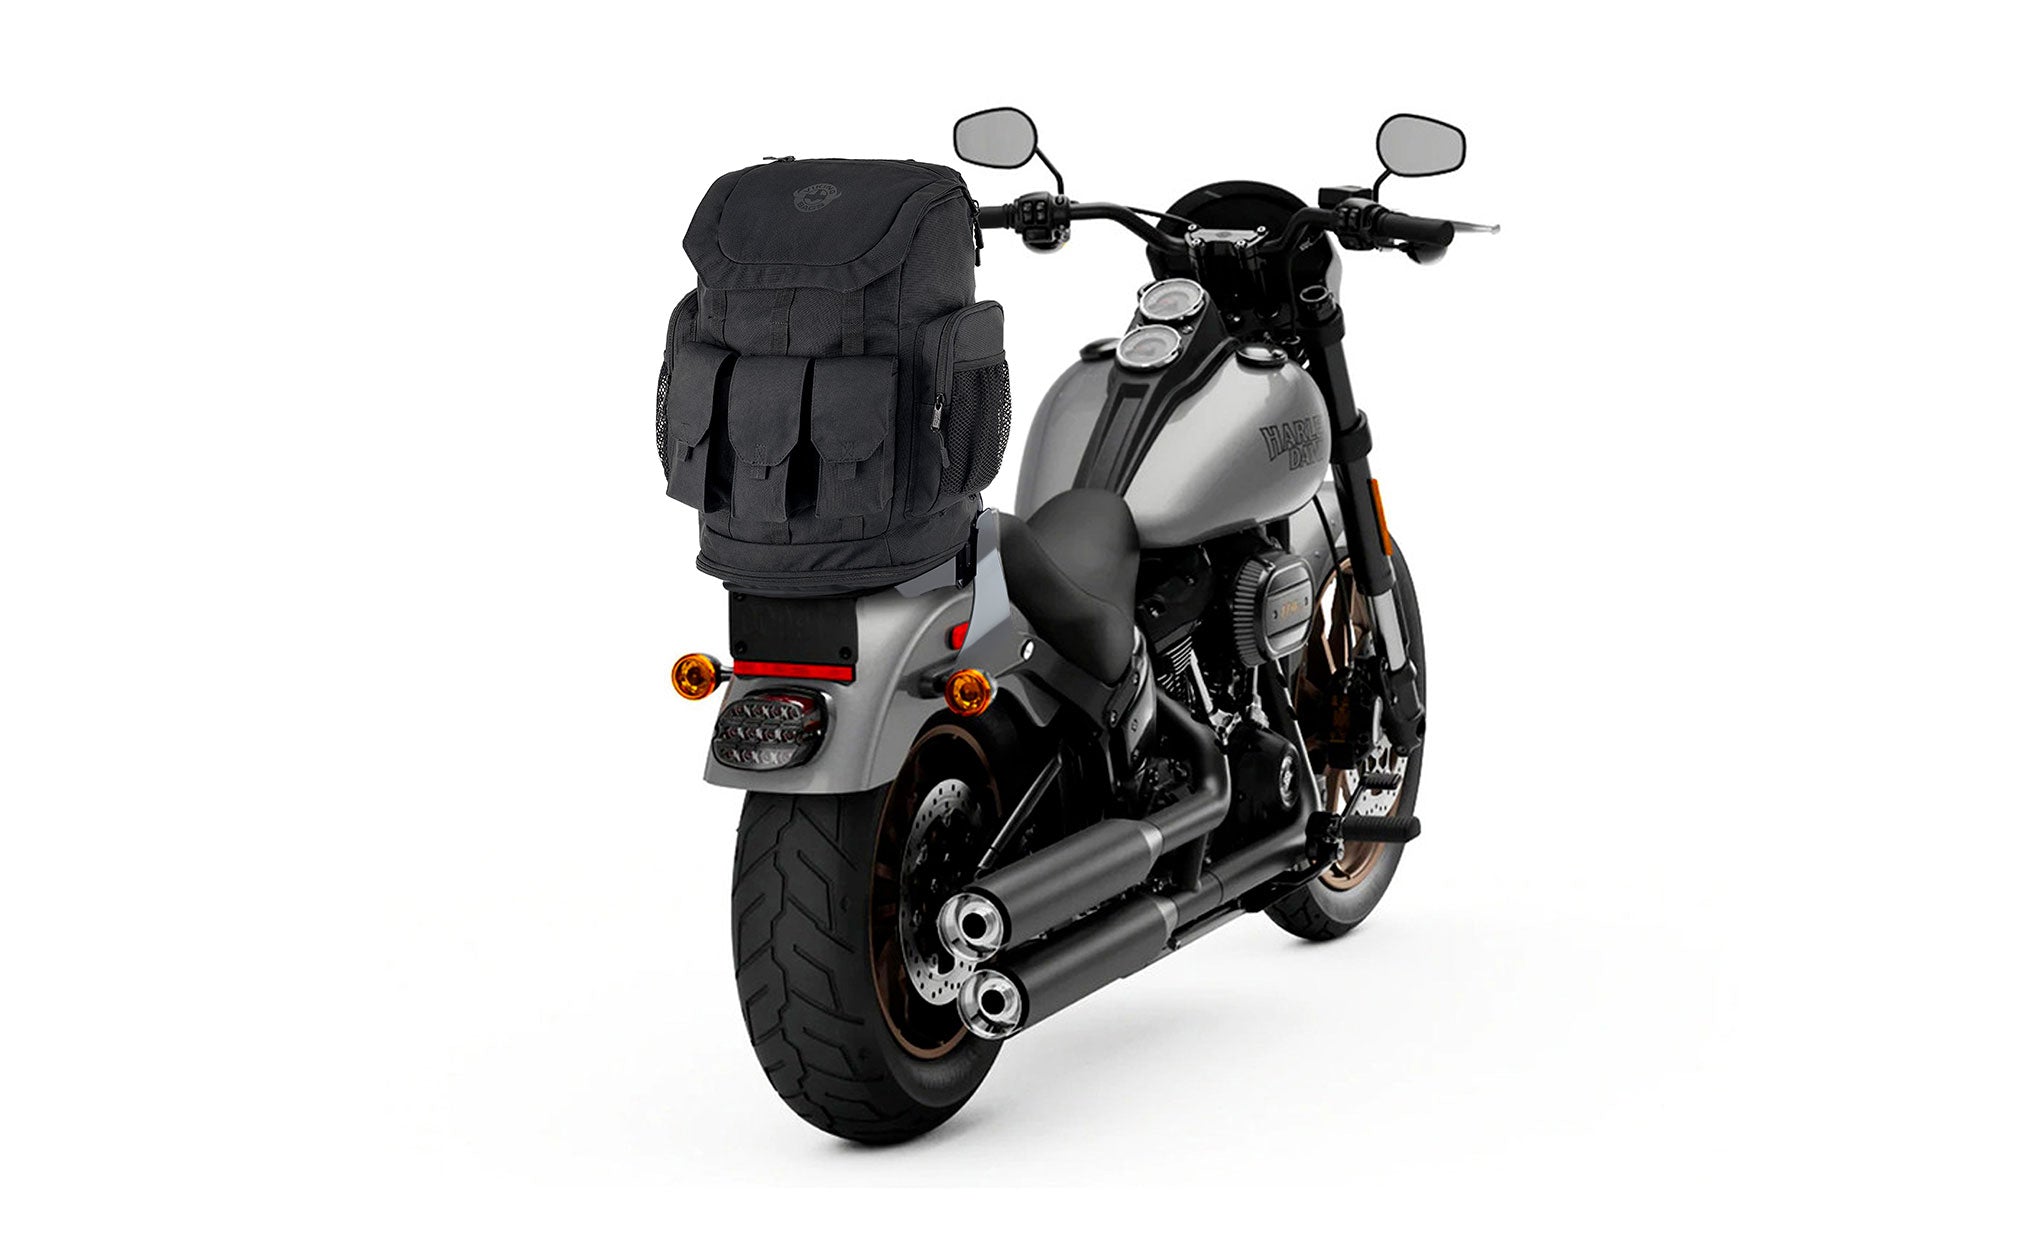 Viking Trident XL Triumph Motorcycle Sissy Bar Backpack Bag on Bike View @expand